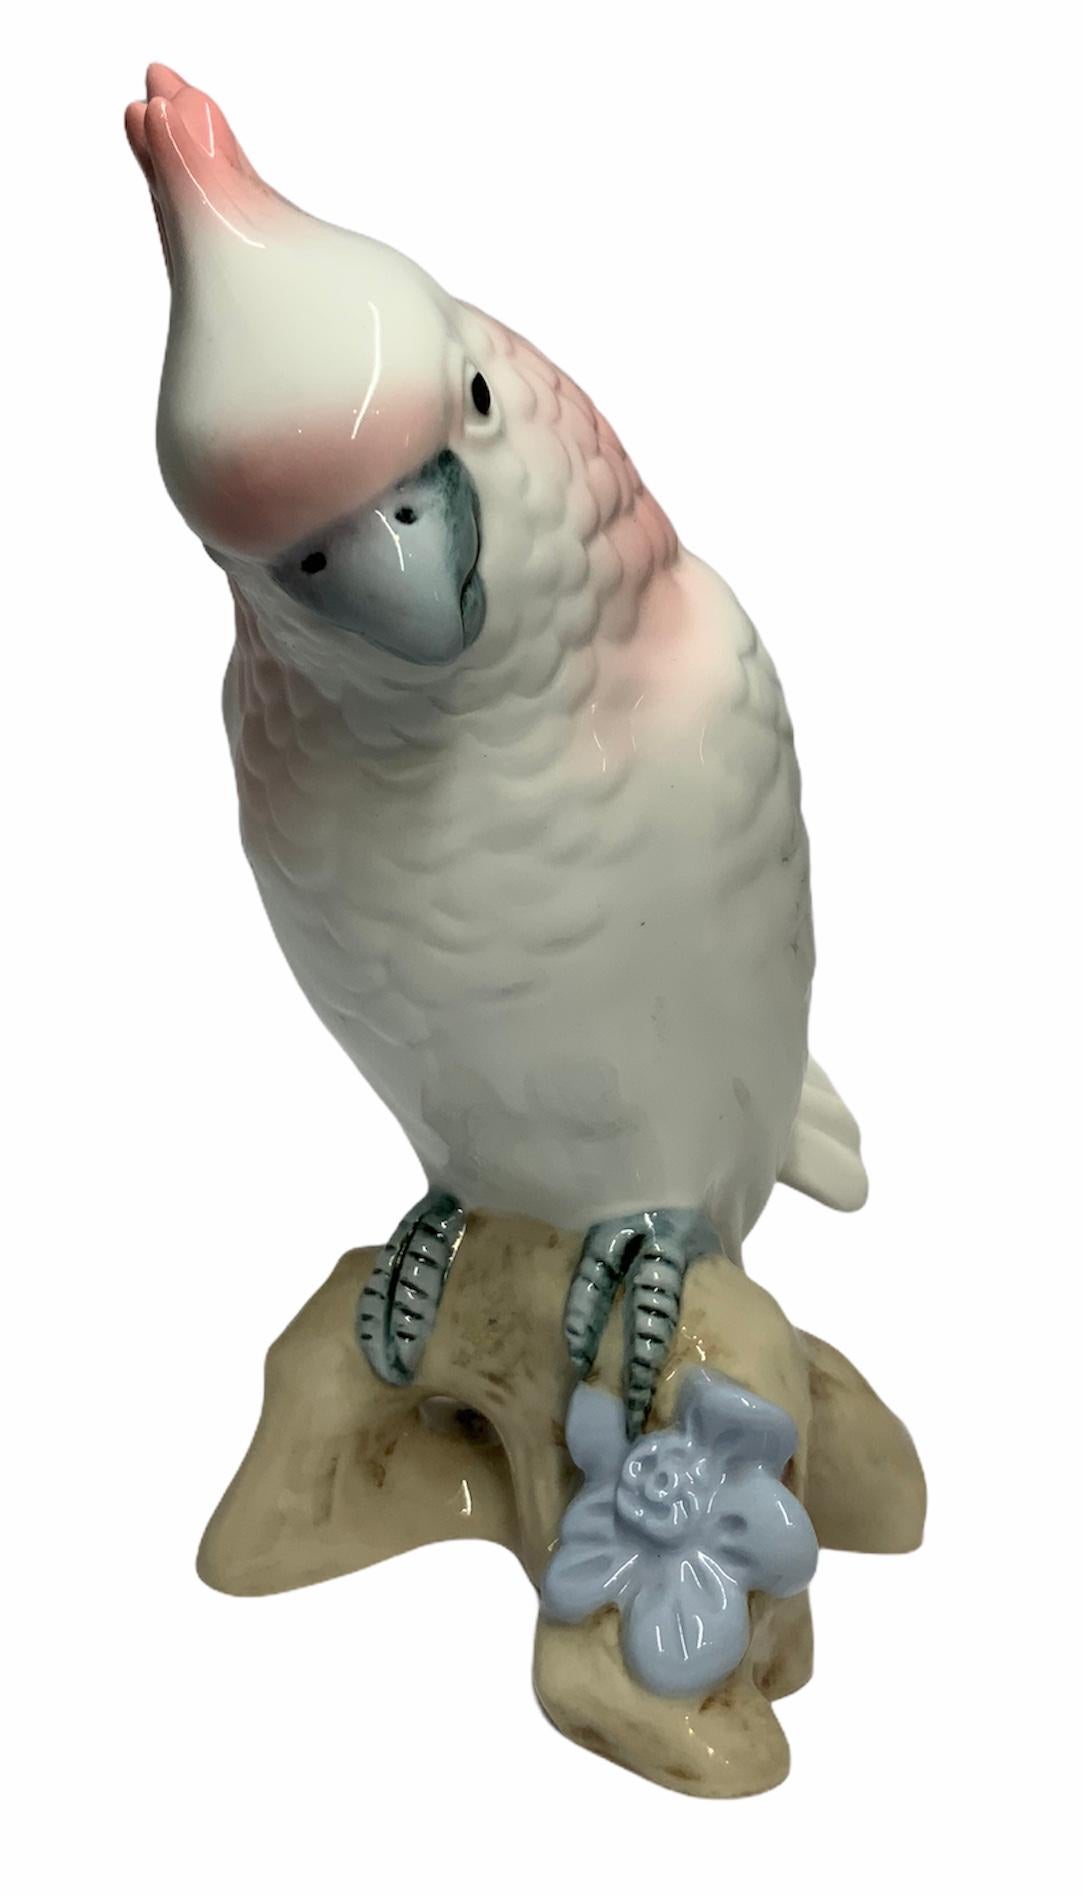 This is a pink and white hand painted porcelain cockatoo with a sweet gaze. He is standing over a wood branch with a blue flower. Royal Dux Bohemia mark plus some numbers are under the base.